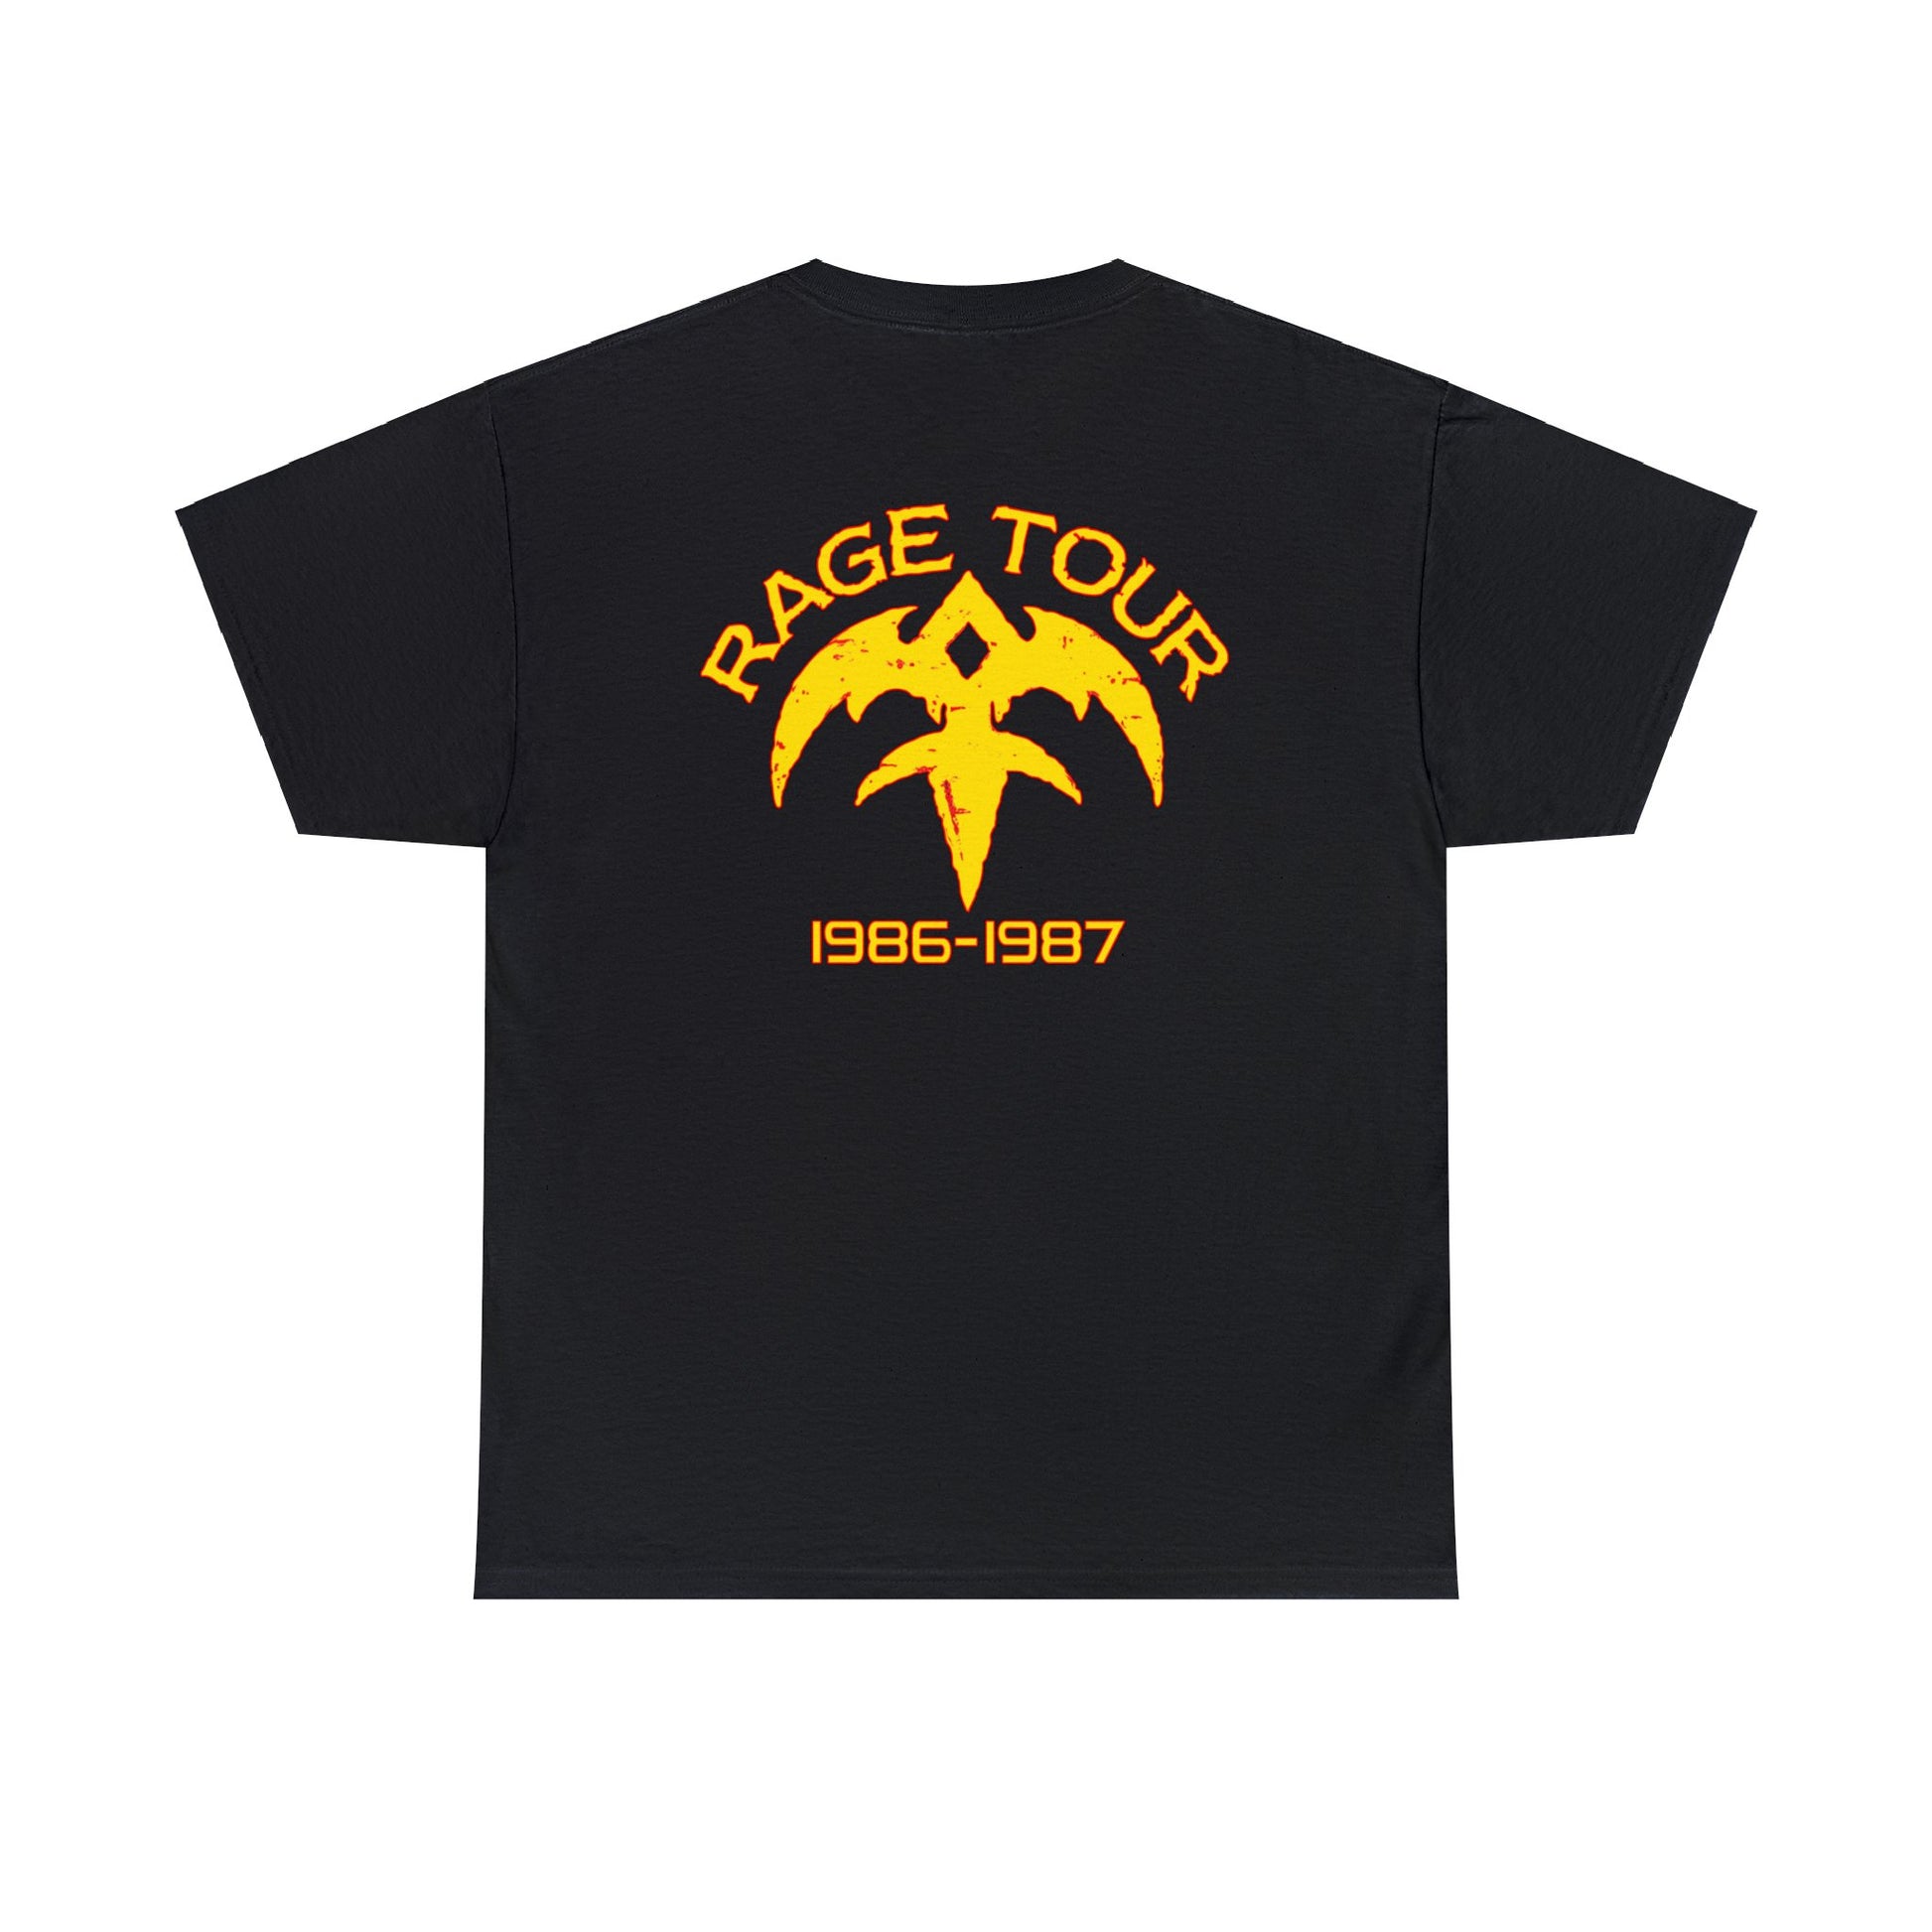 QUEENSRYCHE Rage For Order Tour 1986 T-shirt for Sale